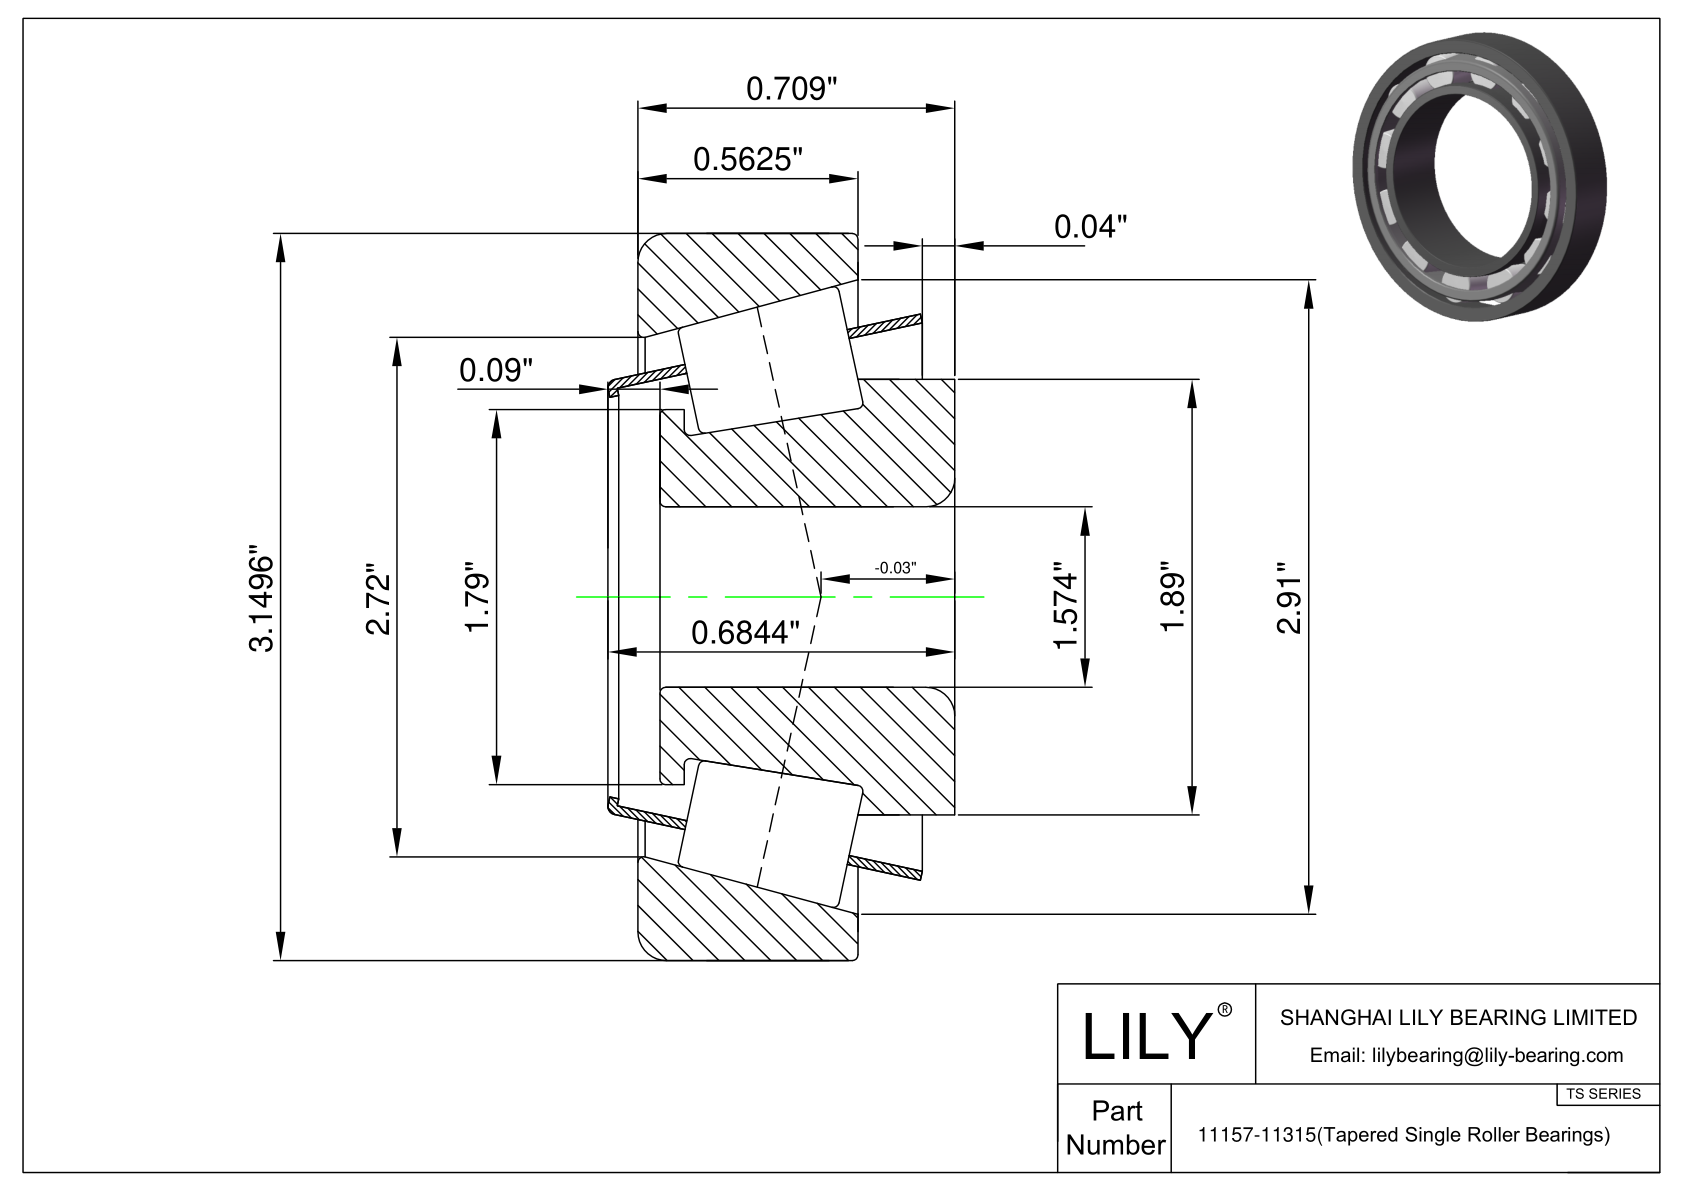 11157-11315 TS (Tapered Single Roller Bearings) (Imperial) cad drawing